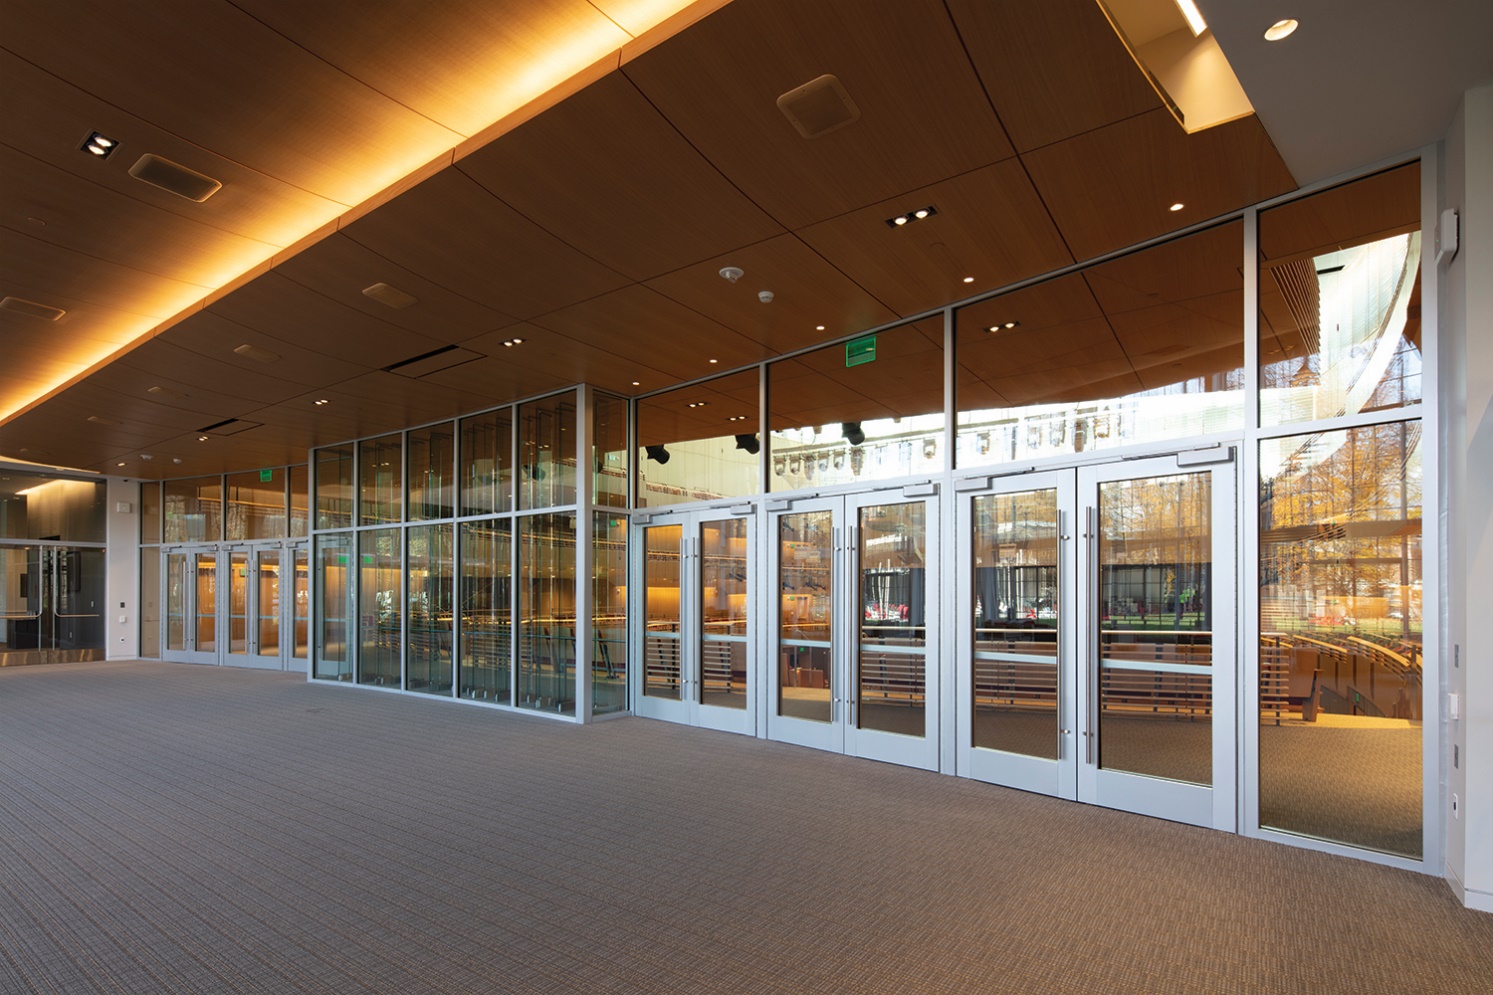 What You Should Know About Fire-Resistant Glazing